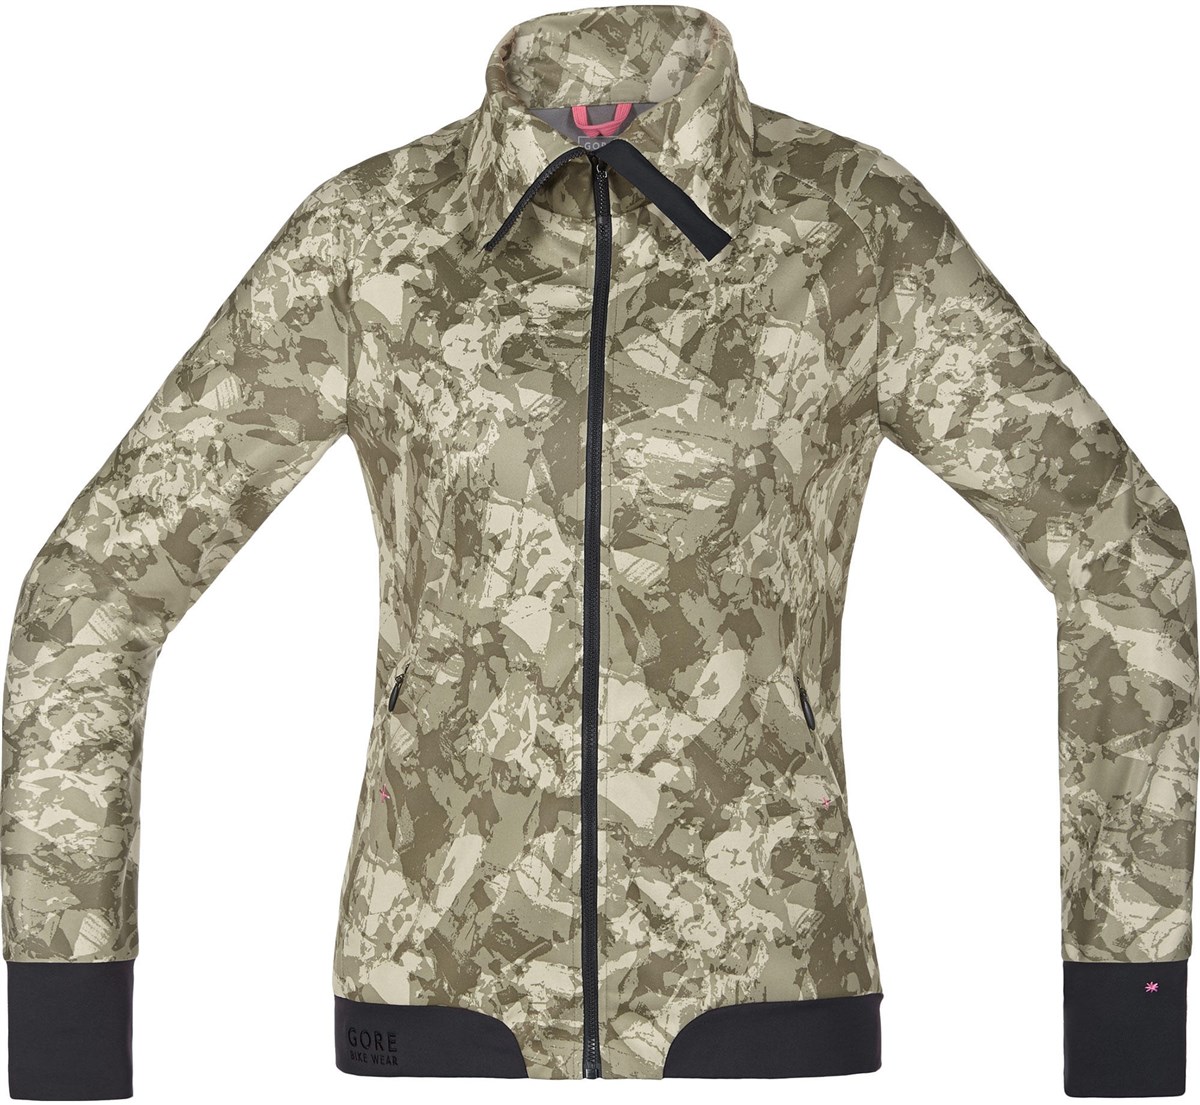 Gore Power Trail Womens Print Windstopper Soft Shell Jacket AW17 product image